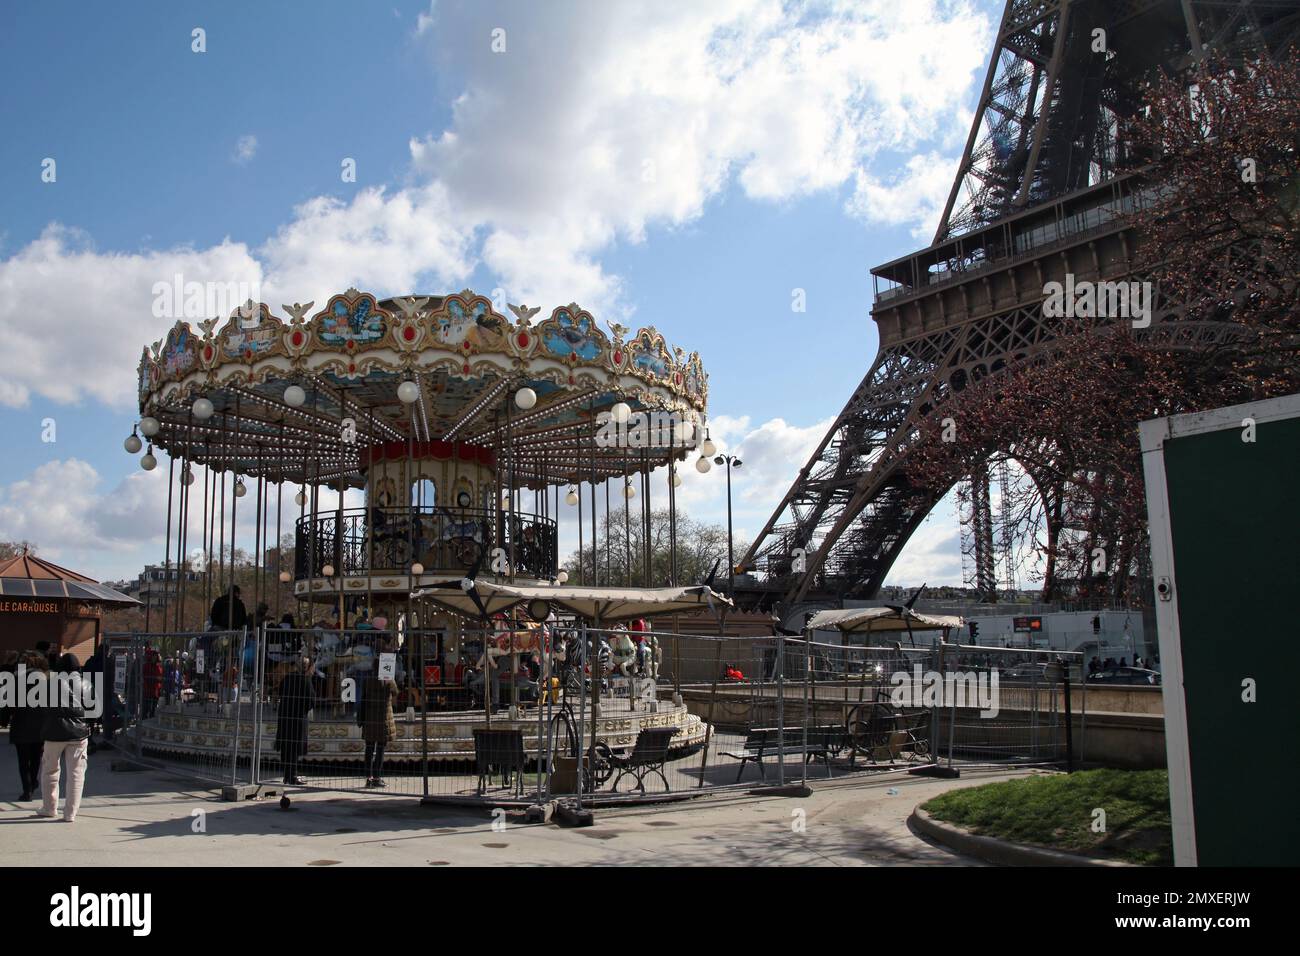 Carousel at base of the Eiffel Tower, Paris, France Stock Photo